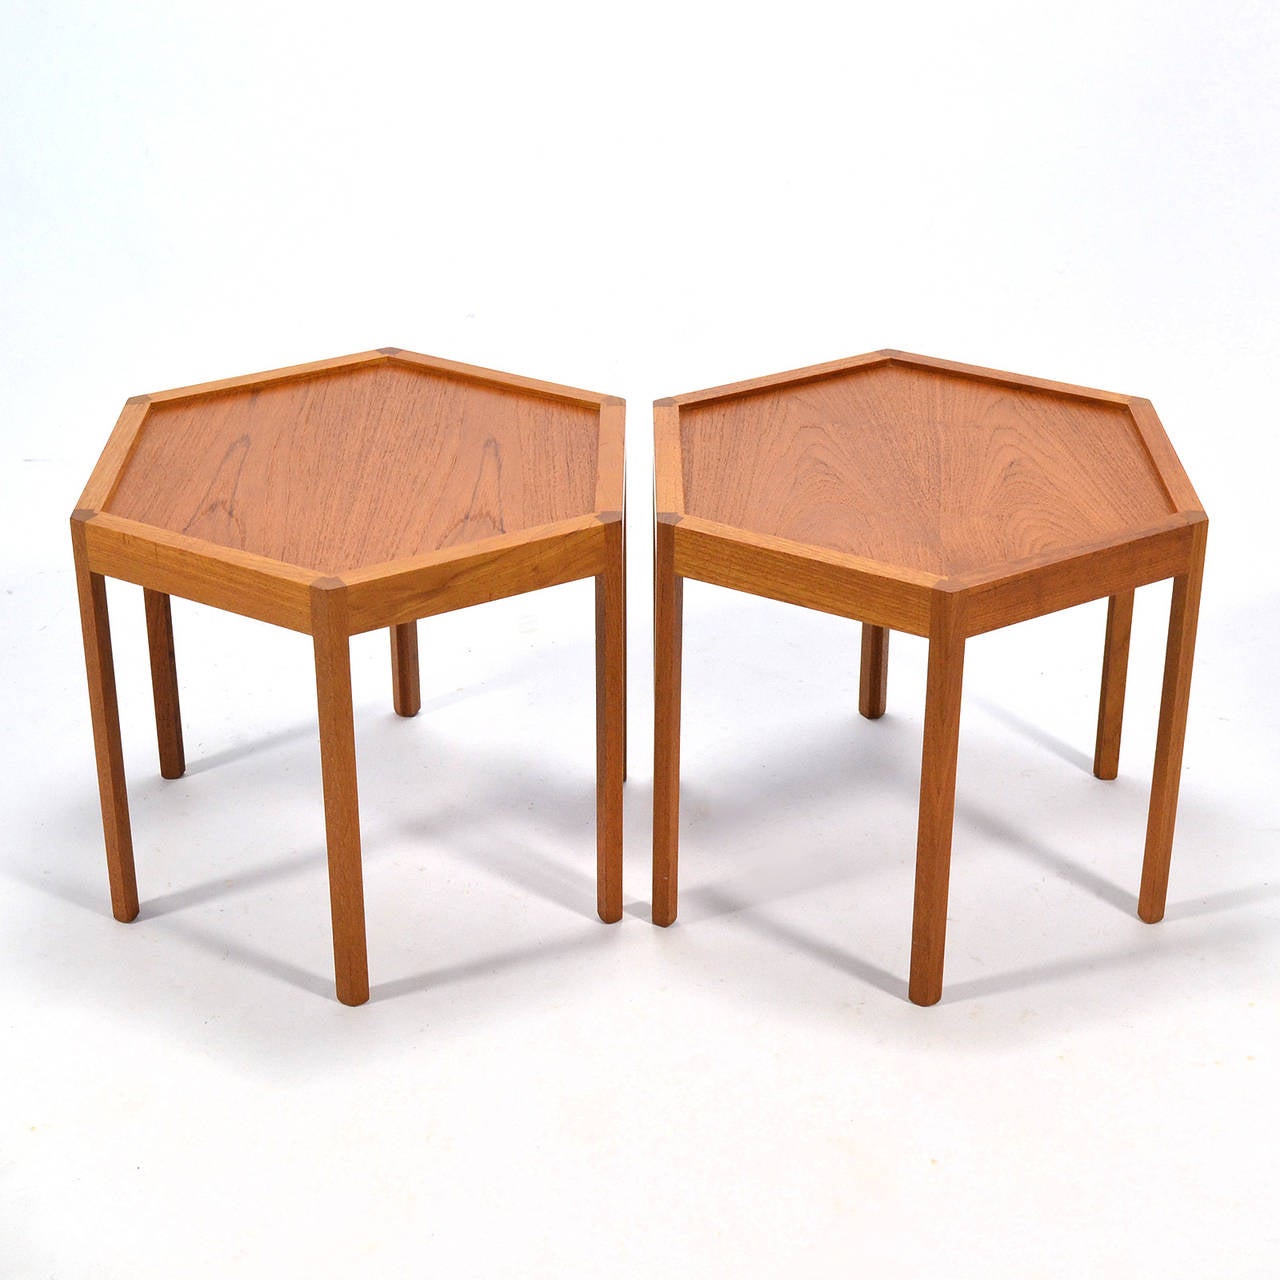 An outstanding example of Danish design and craftsmanship, these two hexagonal side tables by Hans Christian Andersen are delightful. The lightly scaled tables are filled with subtle details and stack easily if needed. They function perfectly as